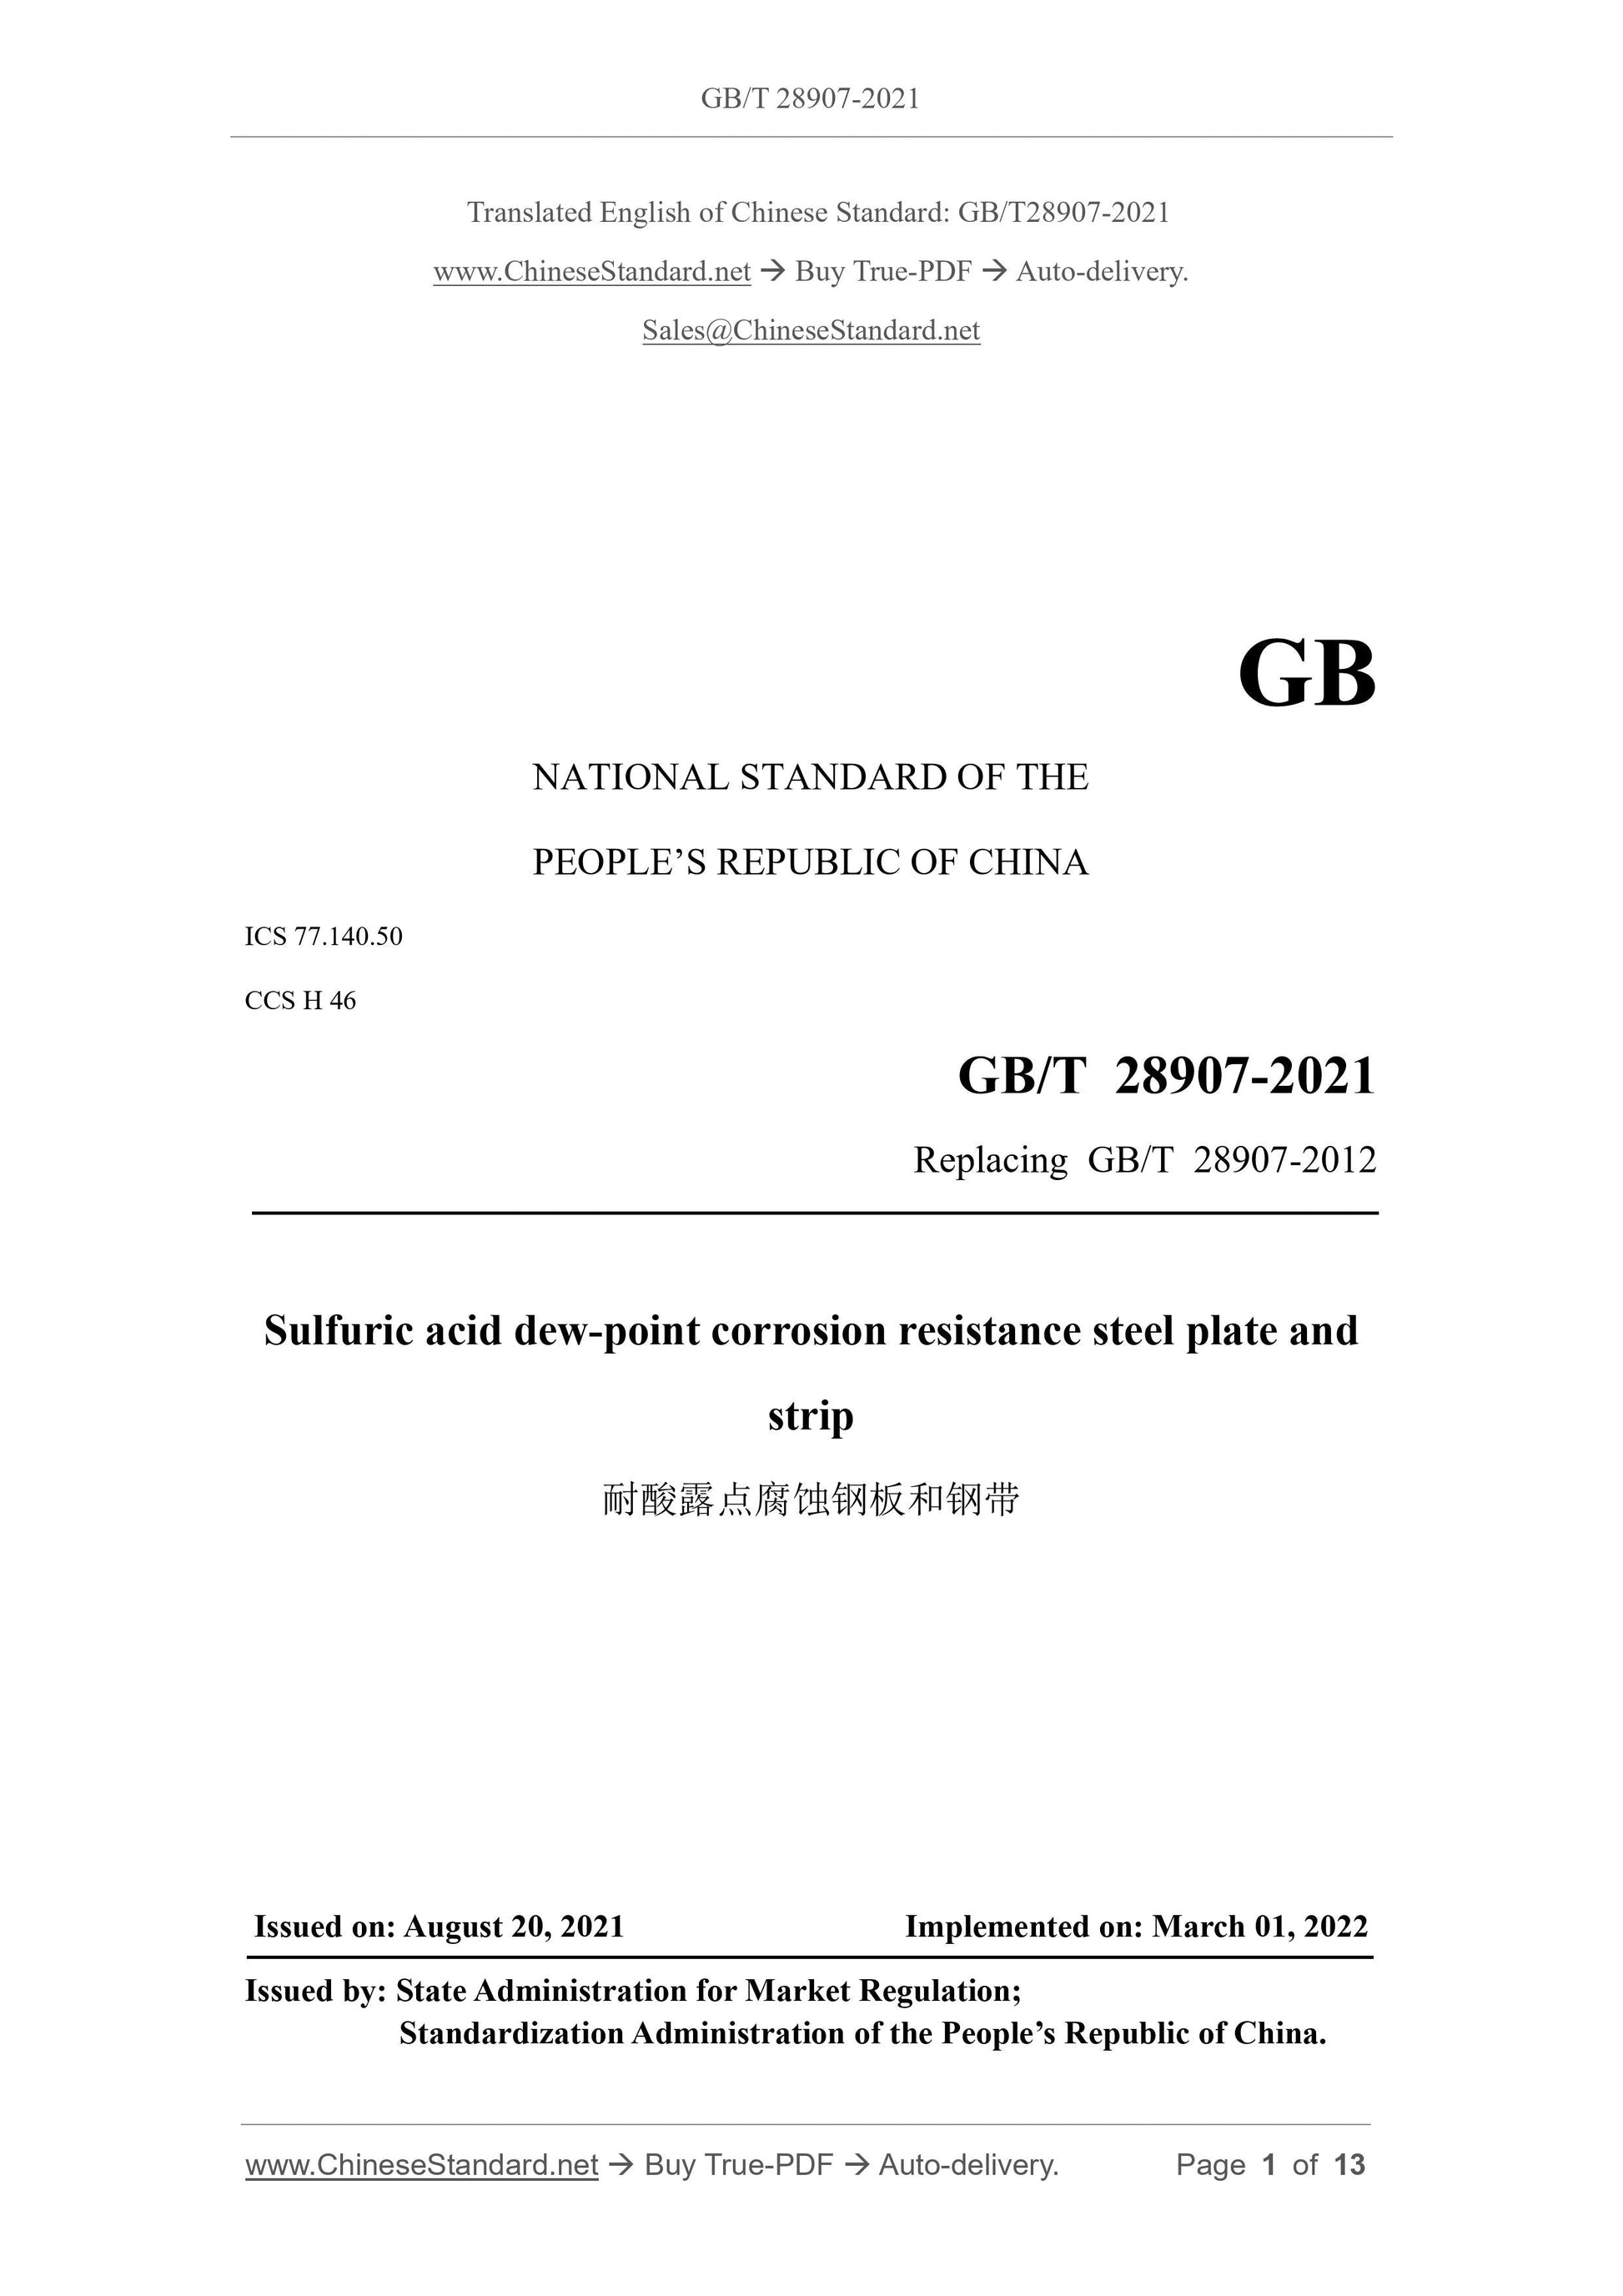 GB/T 28907-2021 Page 1